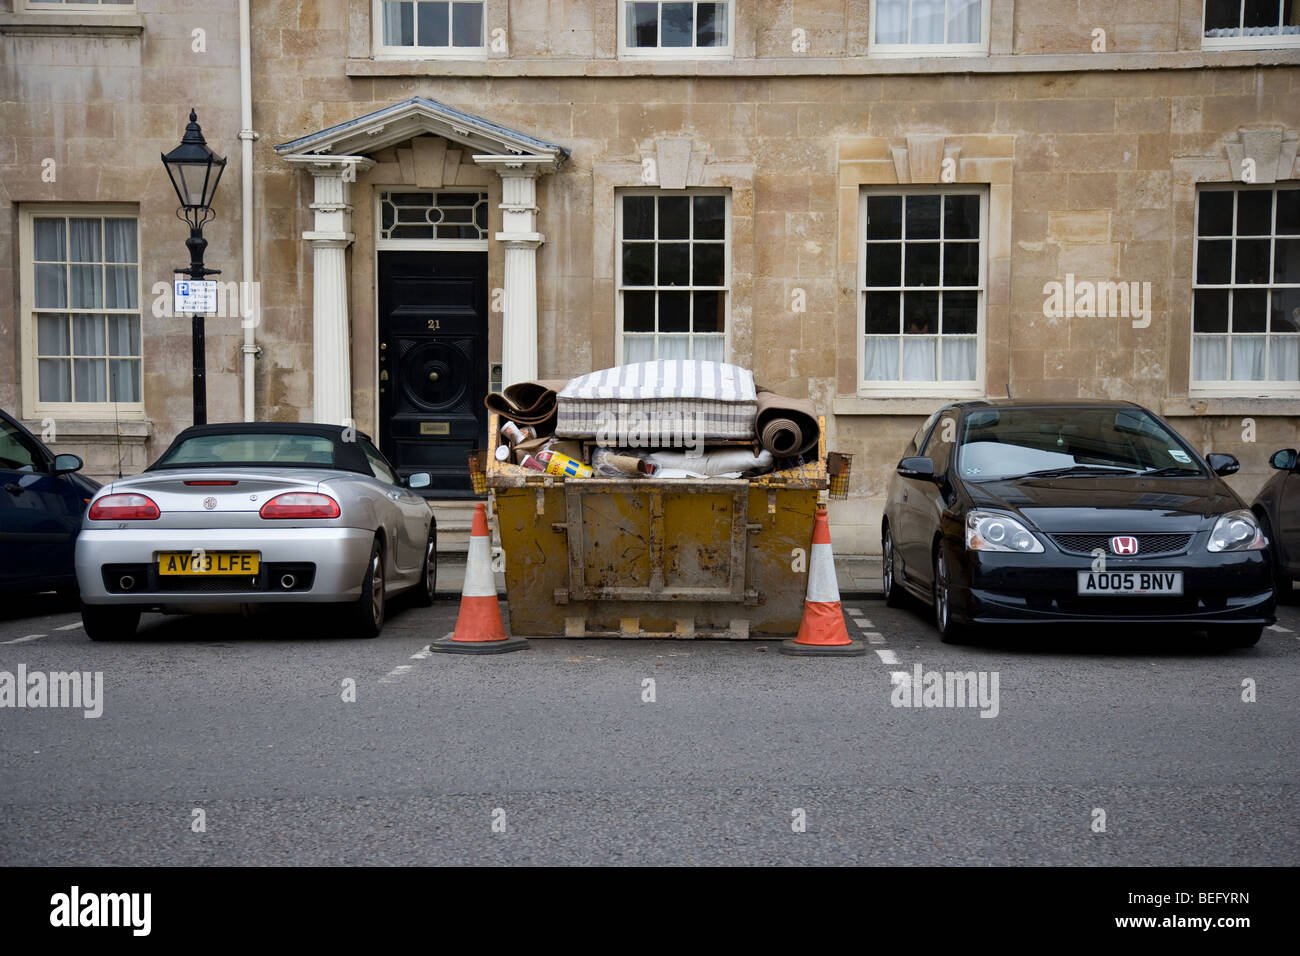 Builders Skip Parked In A Car Parking Space Stock Photo